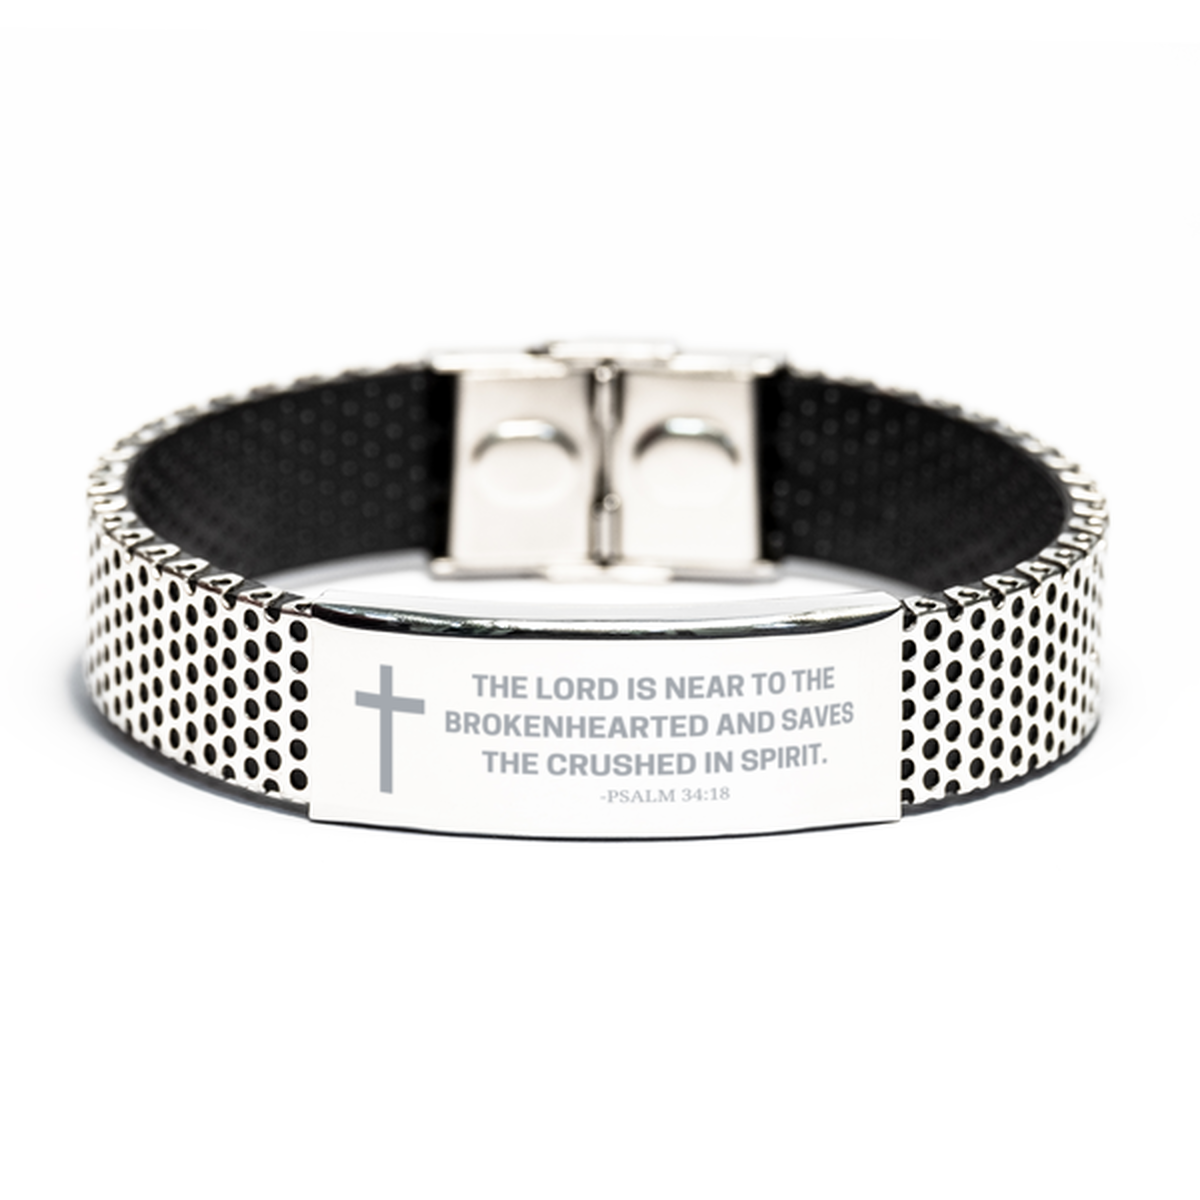 Baptism Gifts For Teenage Boys Girls, Christian Bible Verse Stainless Steel Bracelet, The Lord is near to the brokenhearted, Catholic Confirmation Gifts for Son, Godson, Grandson, Nephew